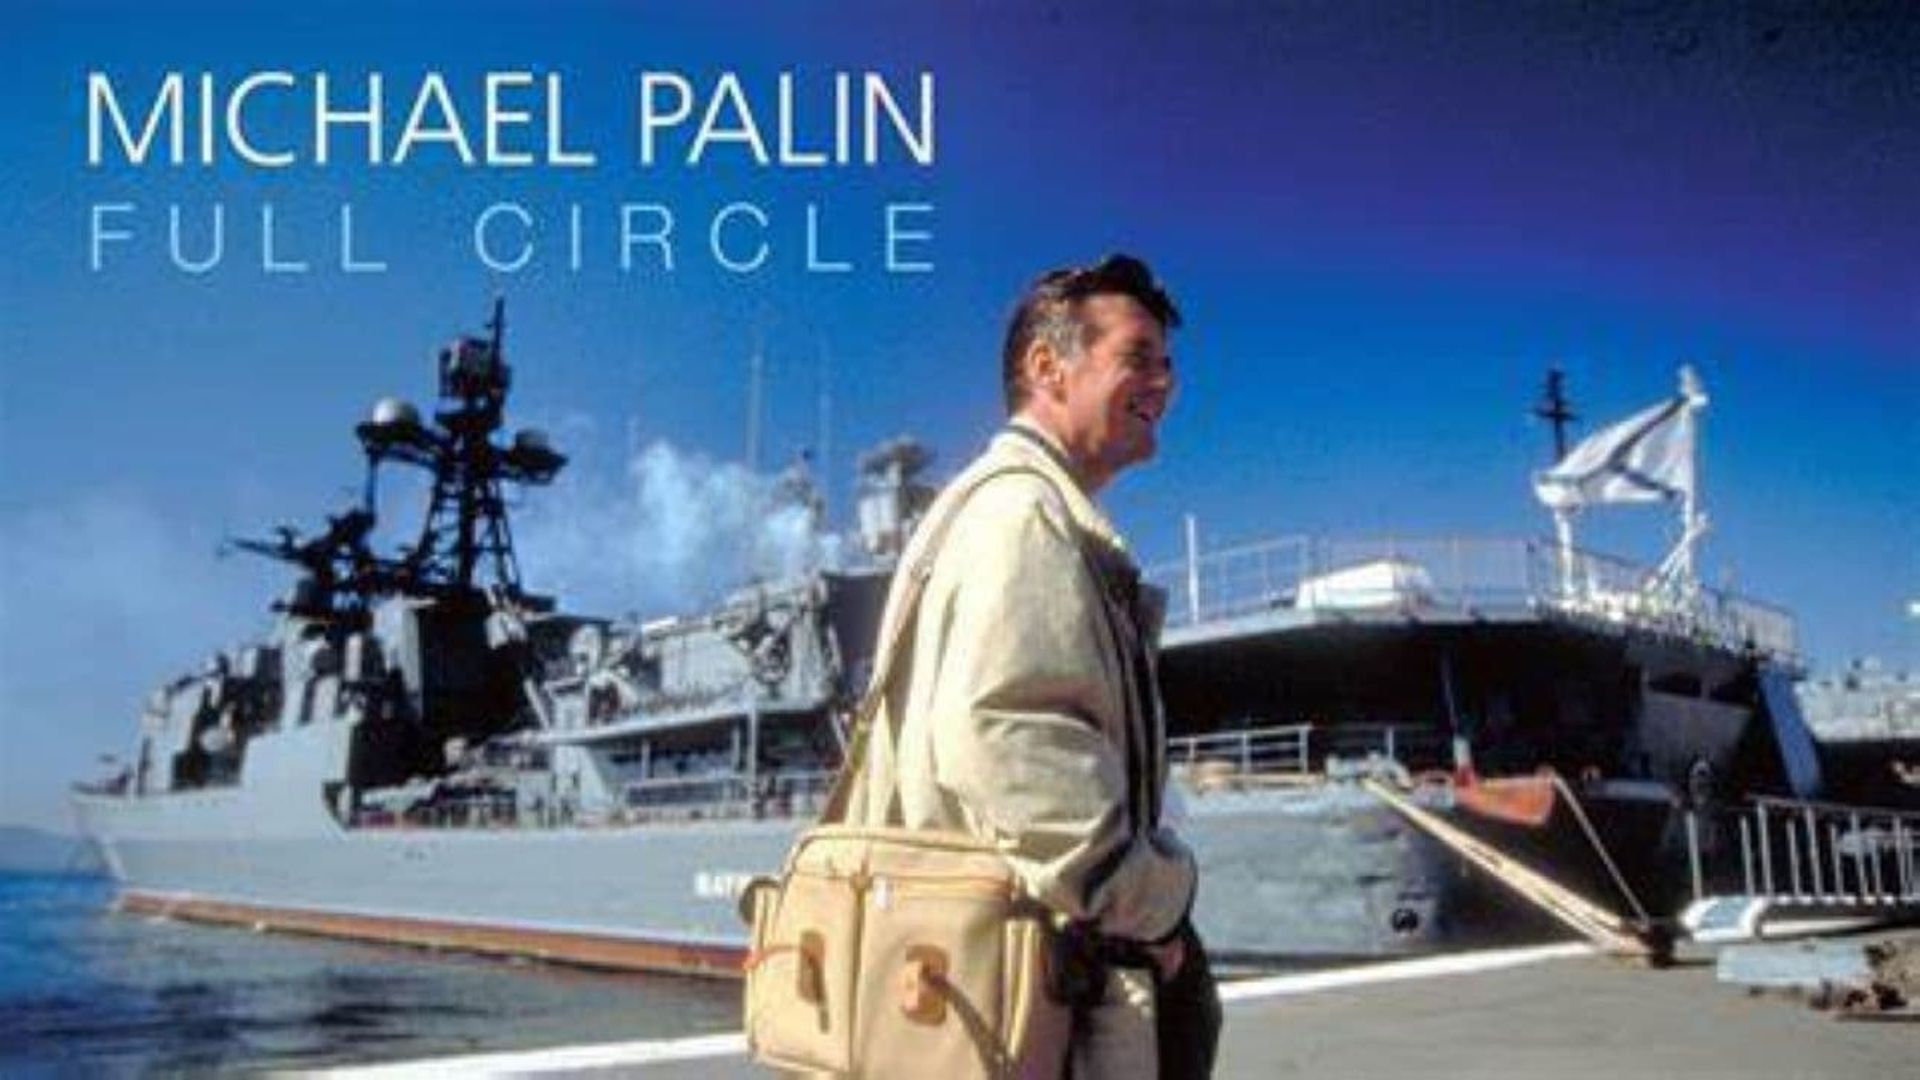 Full Circle with Michael Palin background